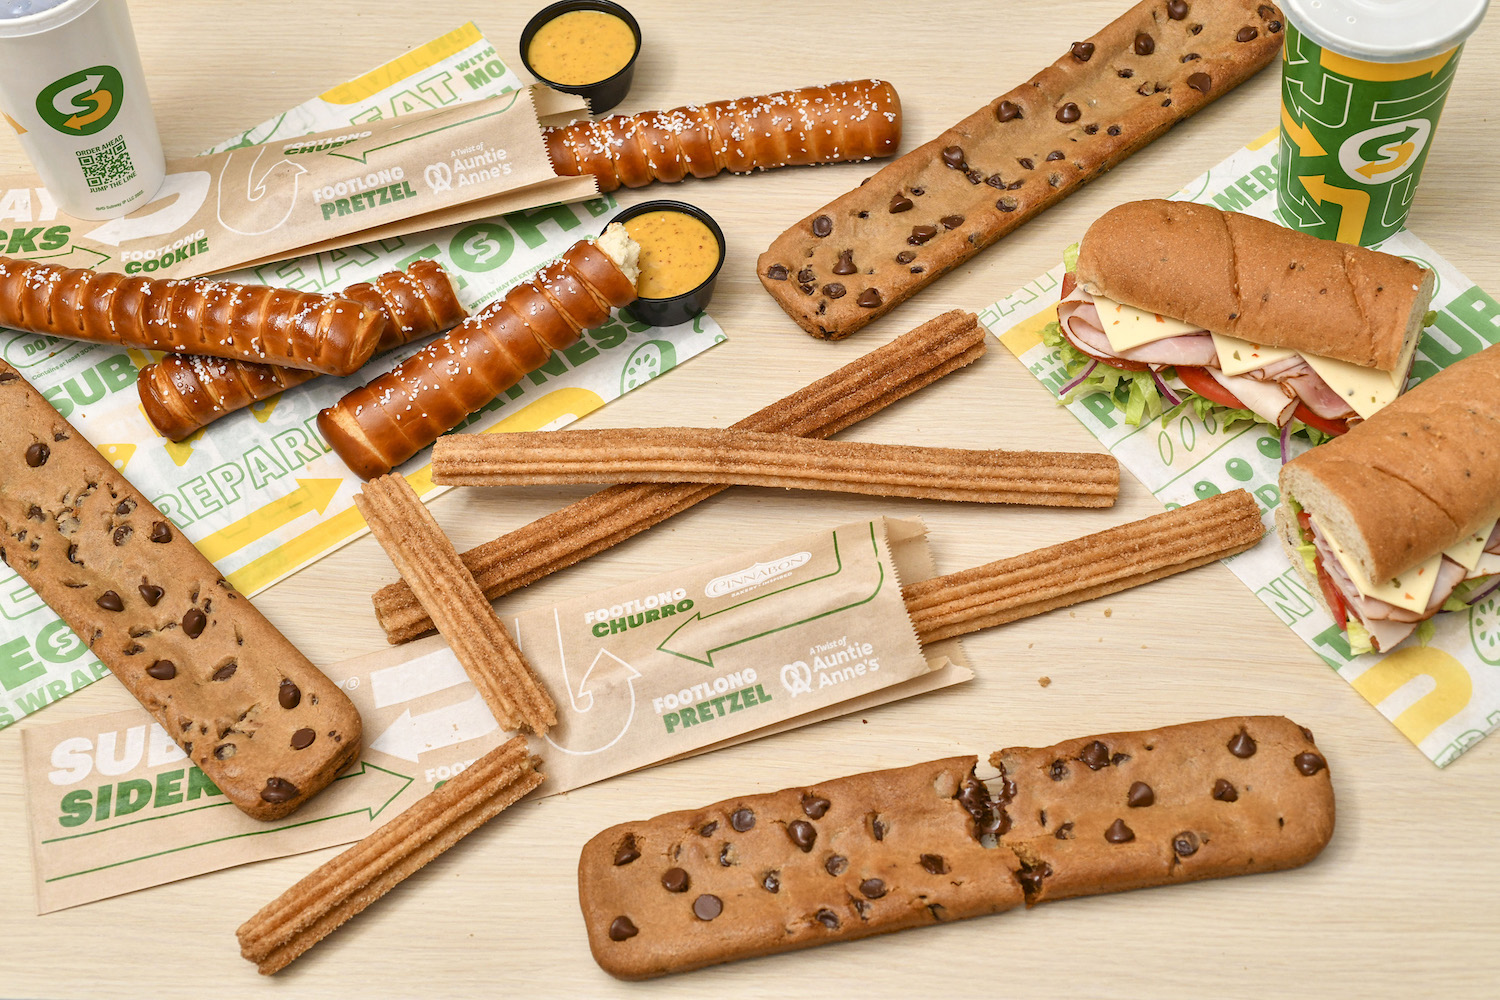 Subway's new Auntie Anne's footlong pretzel bread along with their footlong cookie, Cannabon Footlong Churro